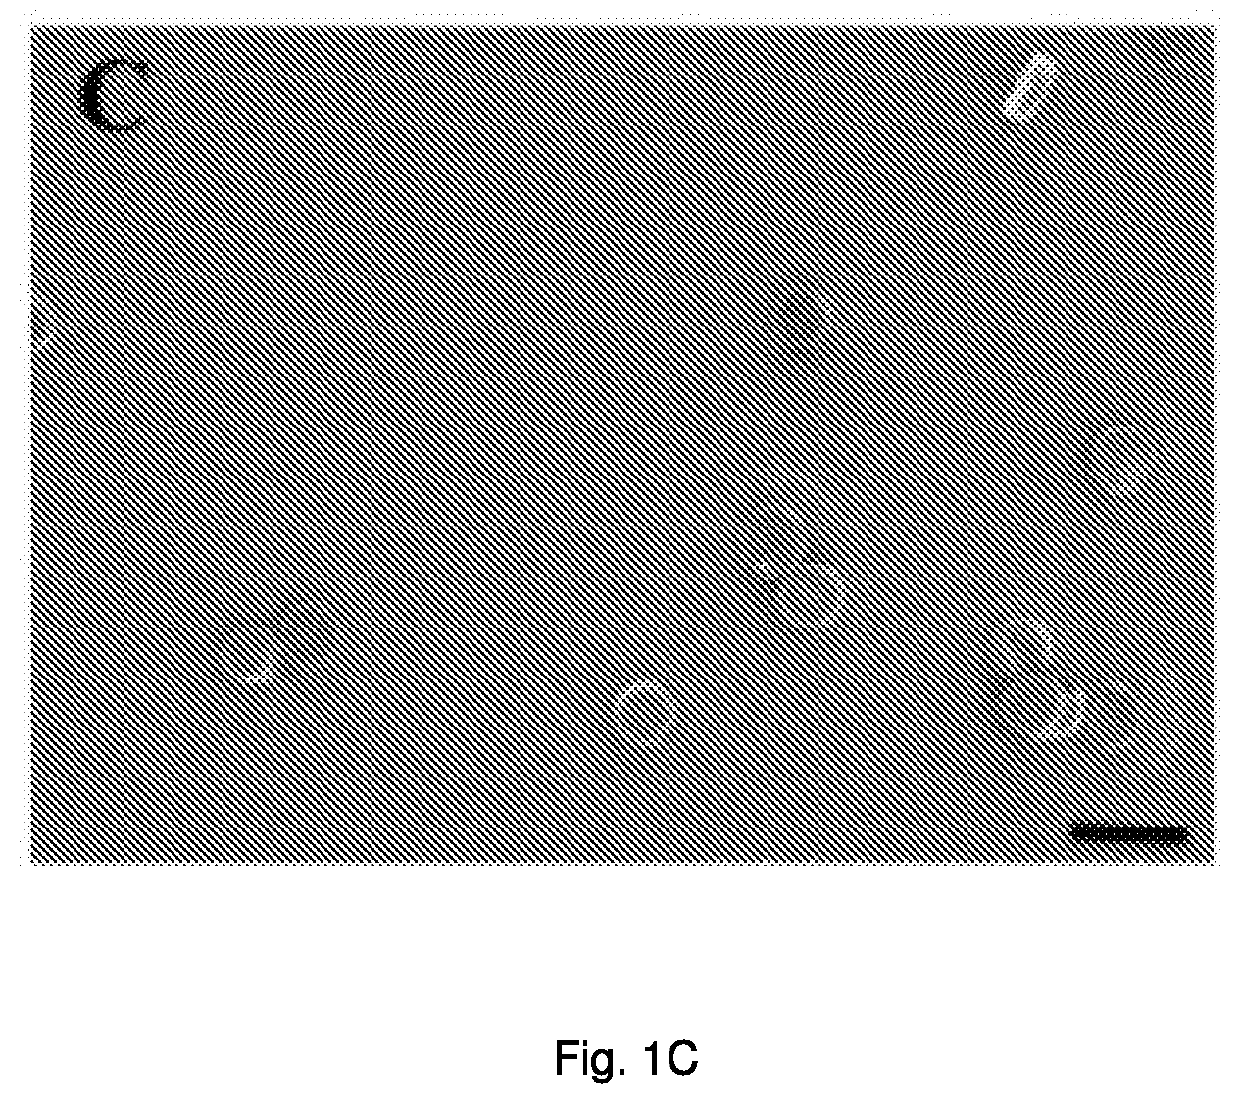 Engineered biocompatible antibiotic particles and their use against urinary tract infection